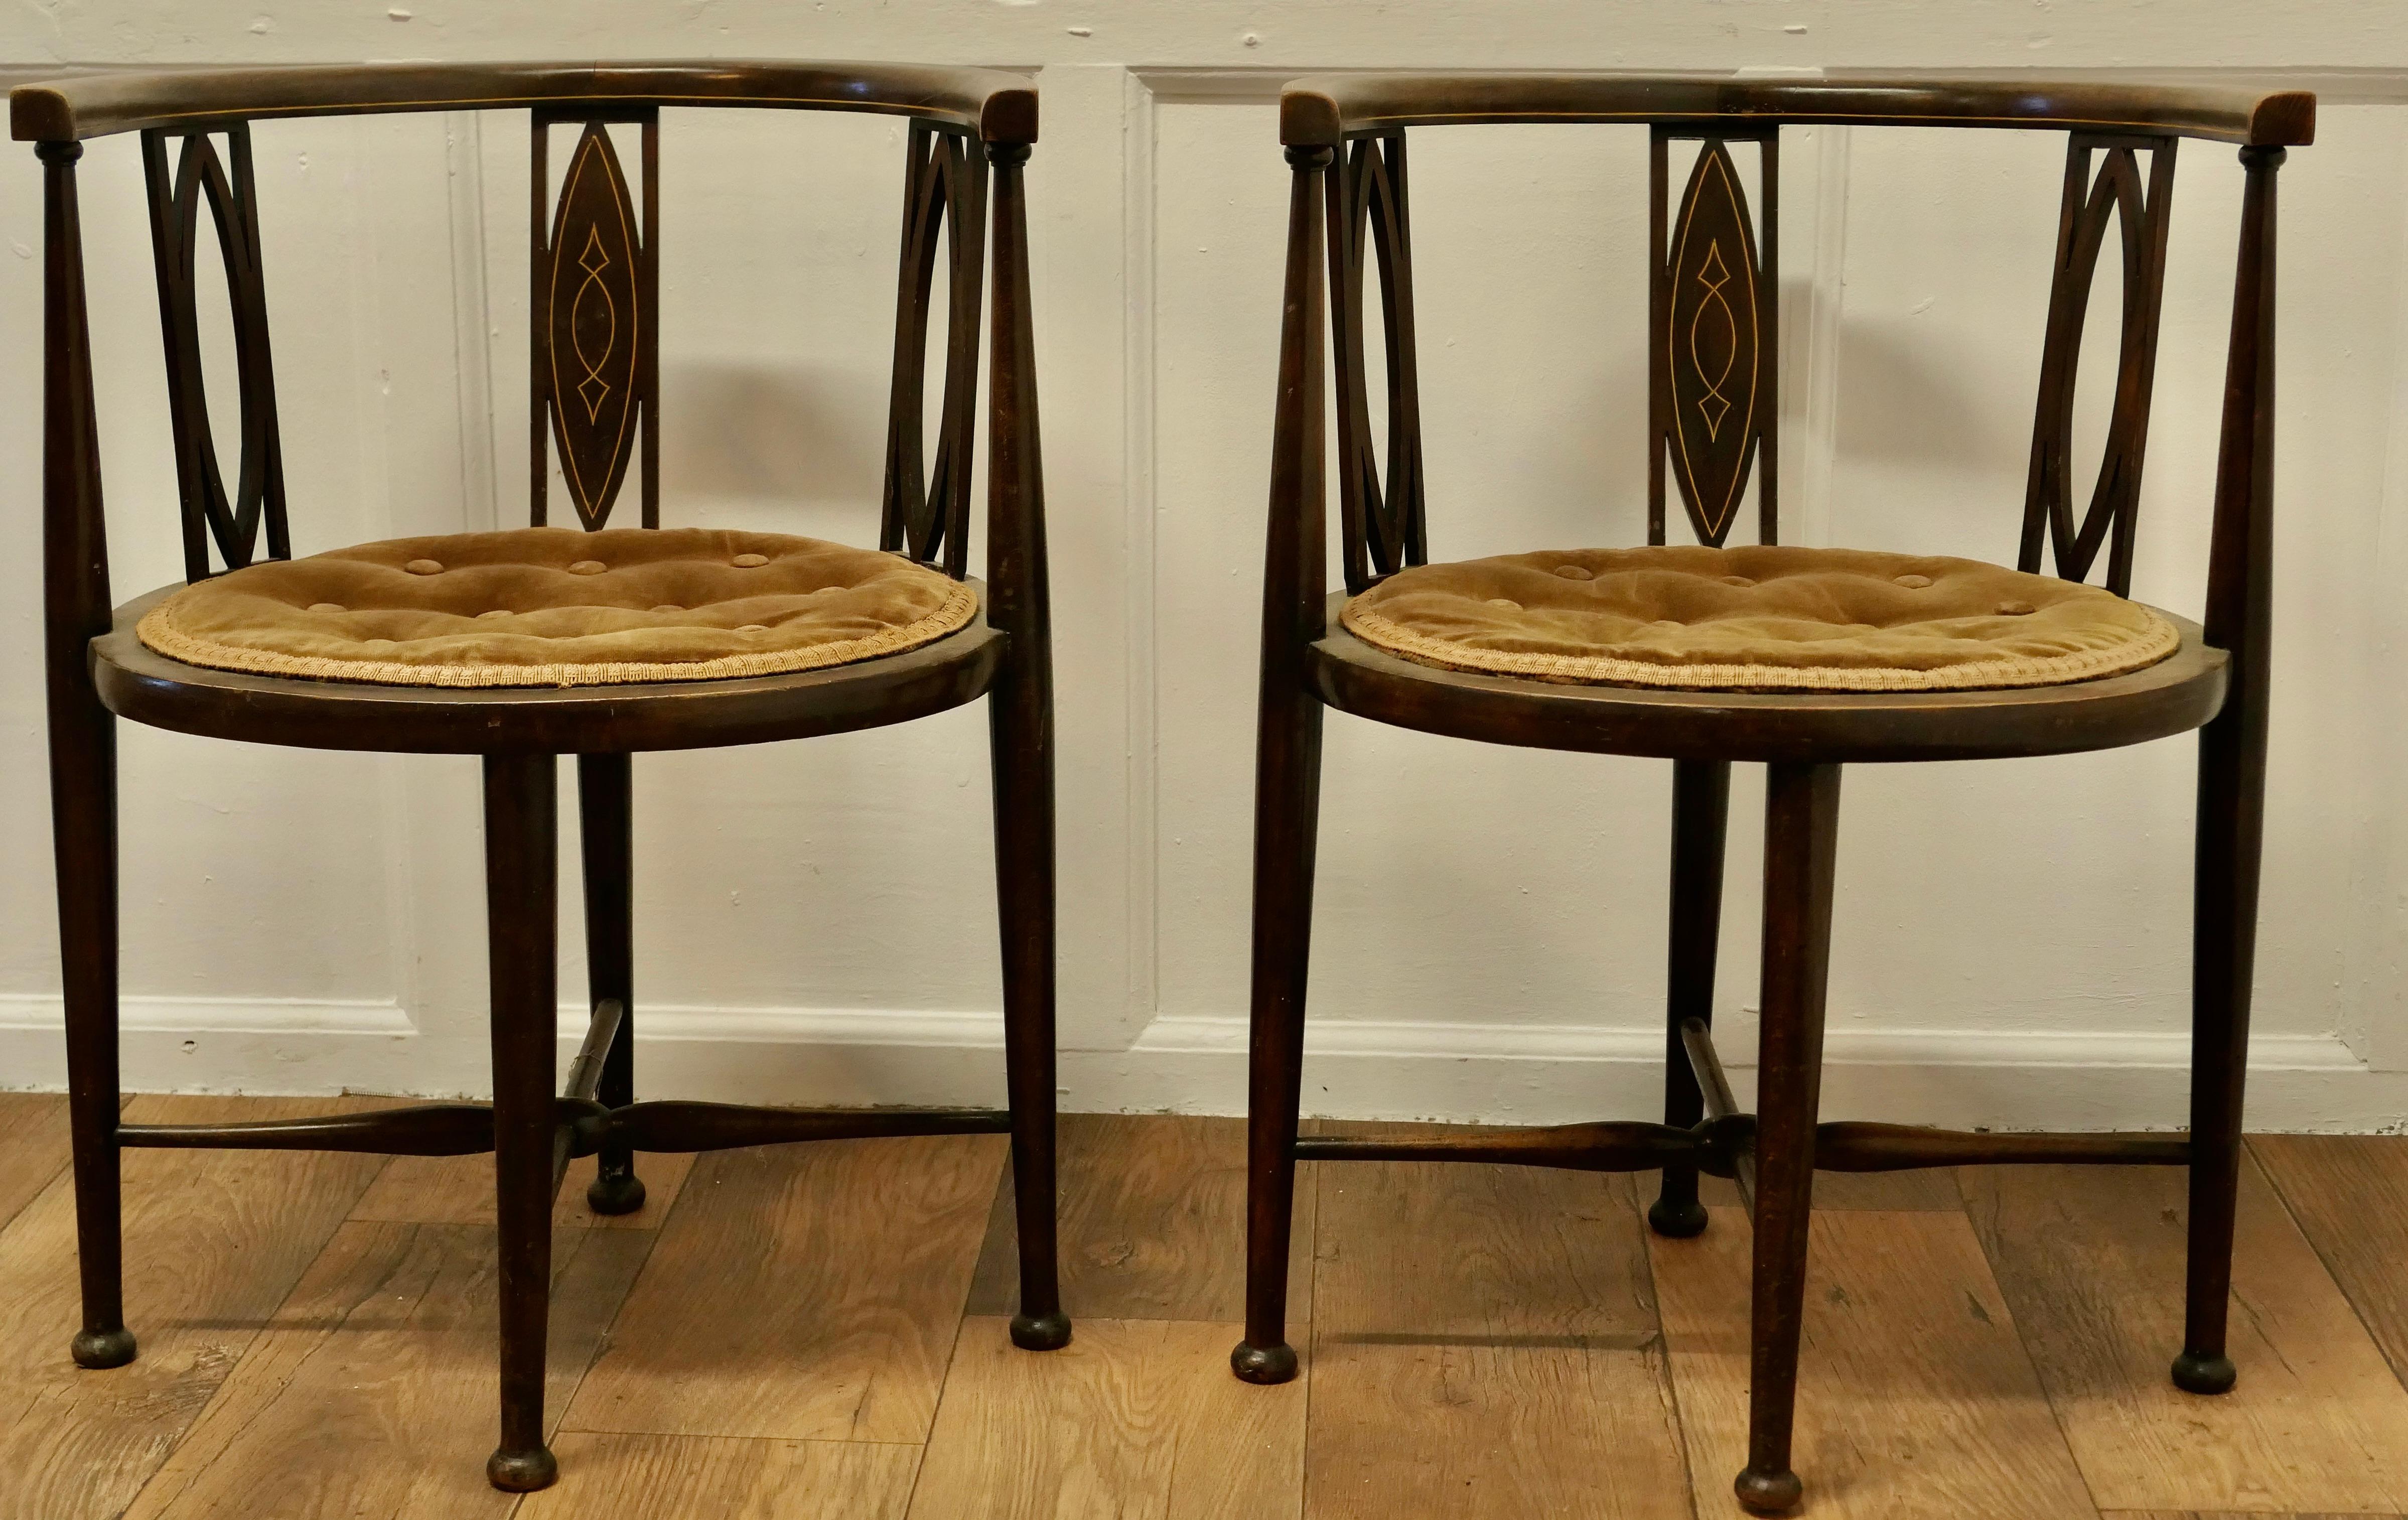 A pair of Edwardian Circular Arm Chairs

A beautiful Pair of occasional chairs and a very unusual shape, the seats are round and the back splats have an oval decoration and shape, the legs are shaped and elegant with x stretchered legs 
The seats